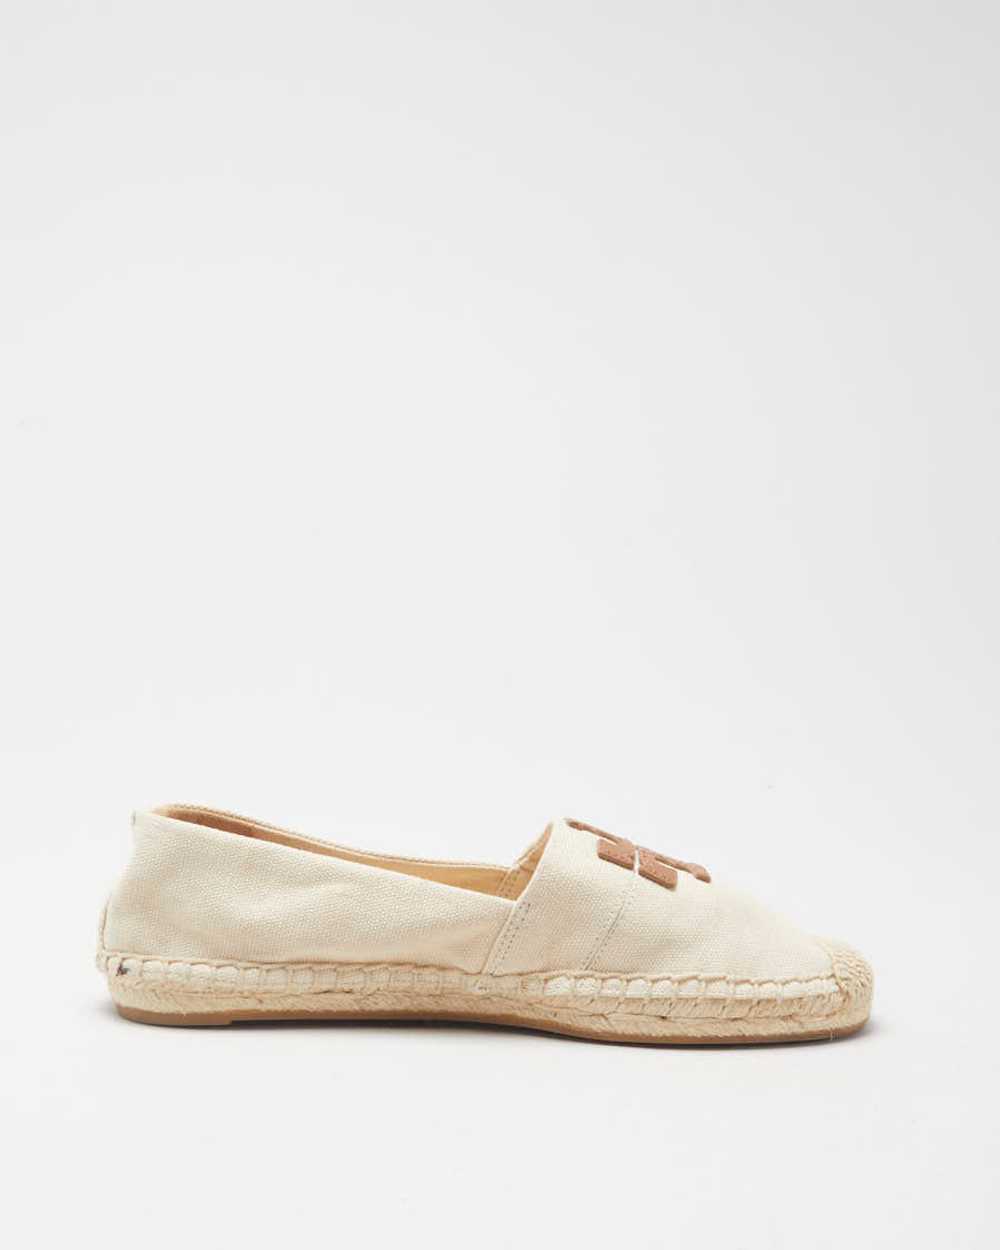 Tory Burch Cream & Brown Canvas Shoes - UK 3.5 - image 2